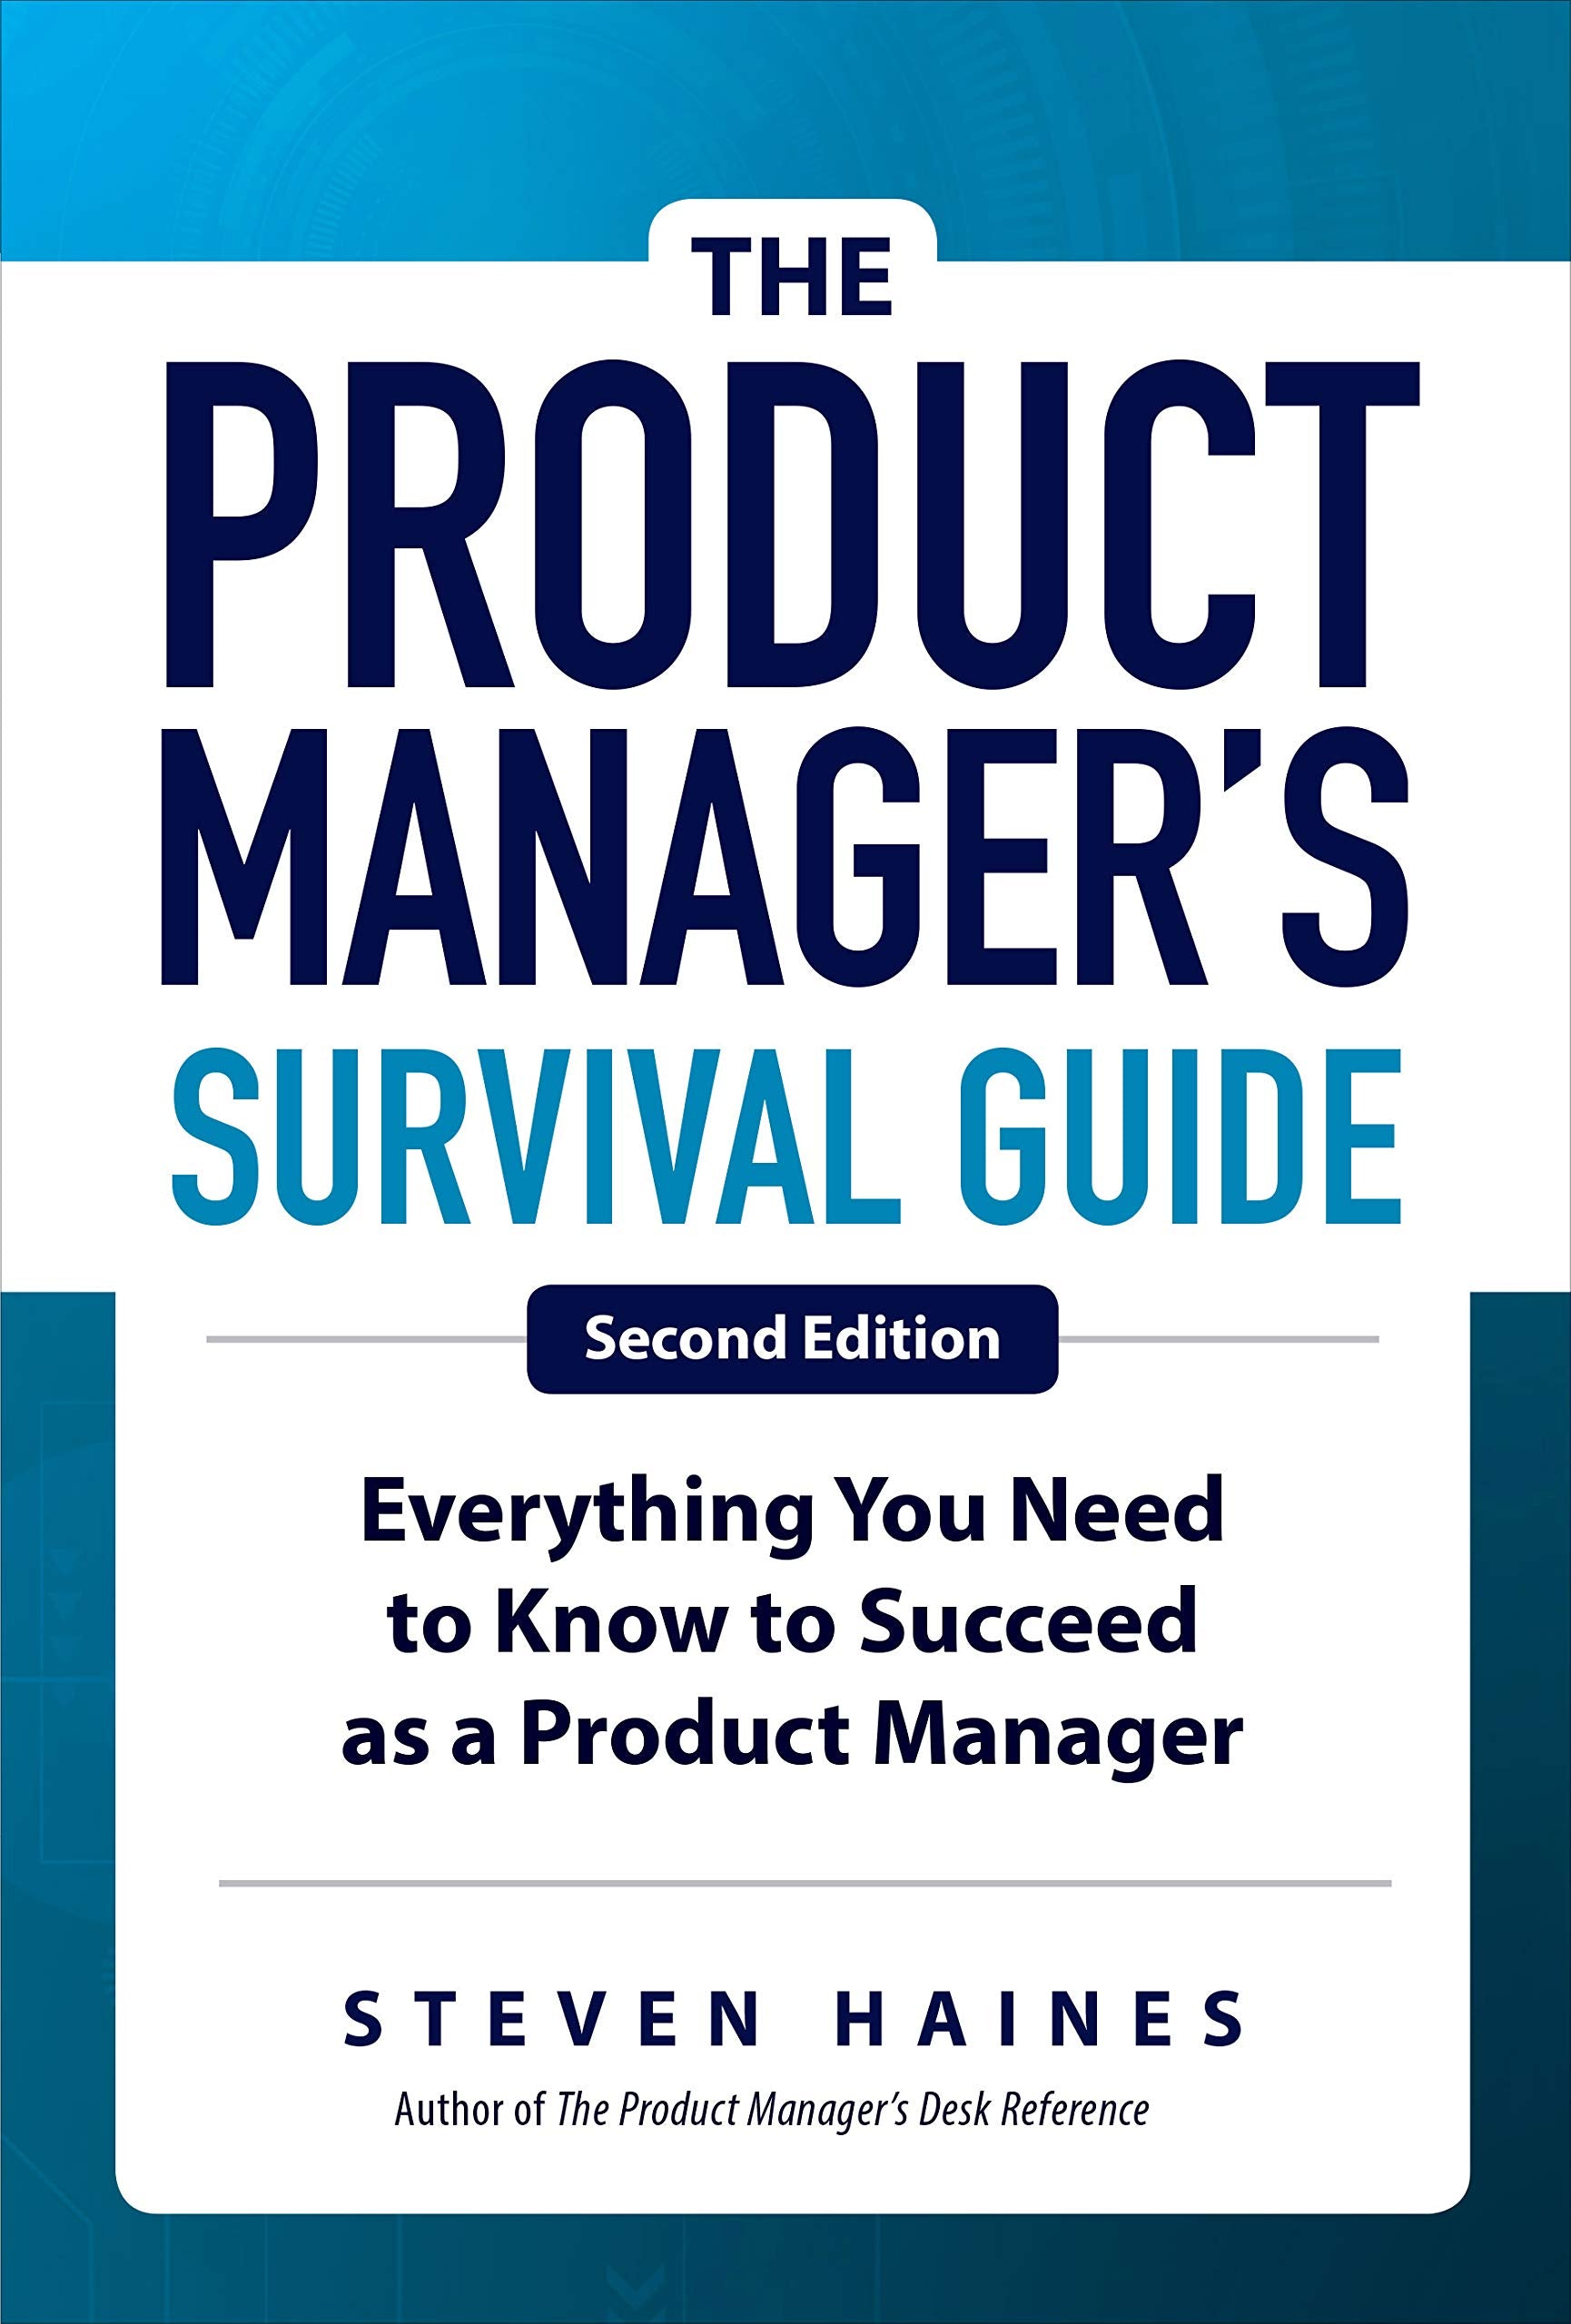 The Product Manager's Survival Guide 2nd Edition - Steven Haines - 9781260135237 - McGraw-Hill Education